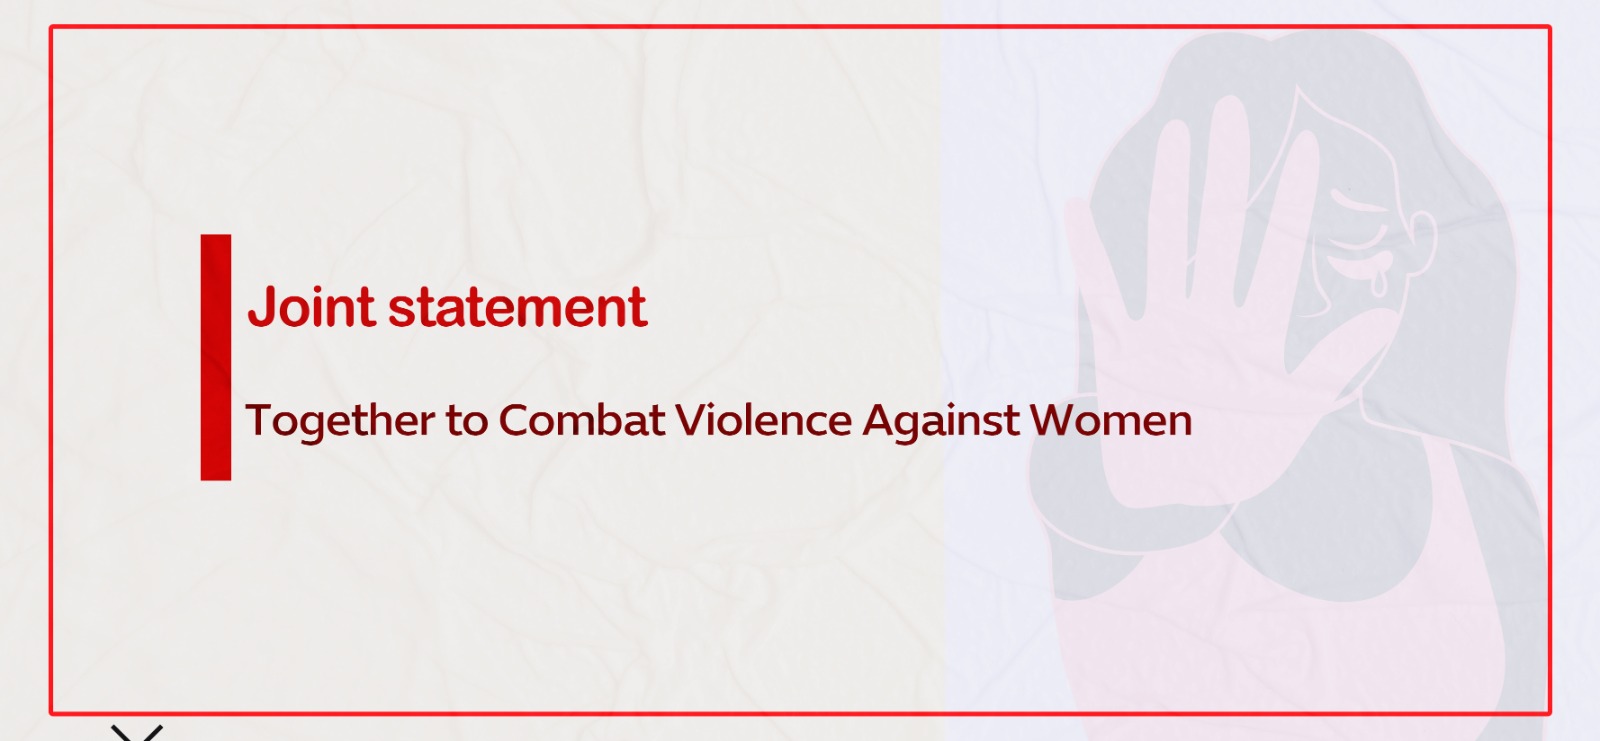 On 16 Days of Activism: Together to Combat Violence Against Women